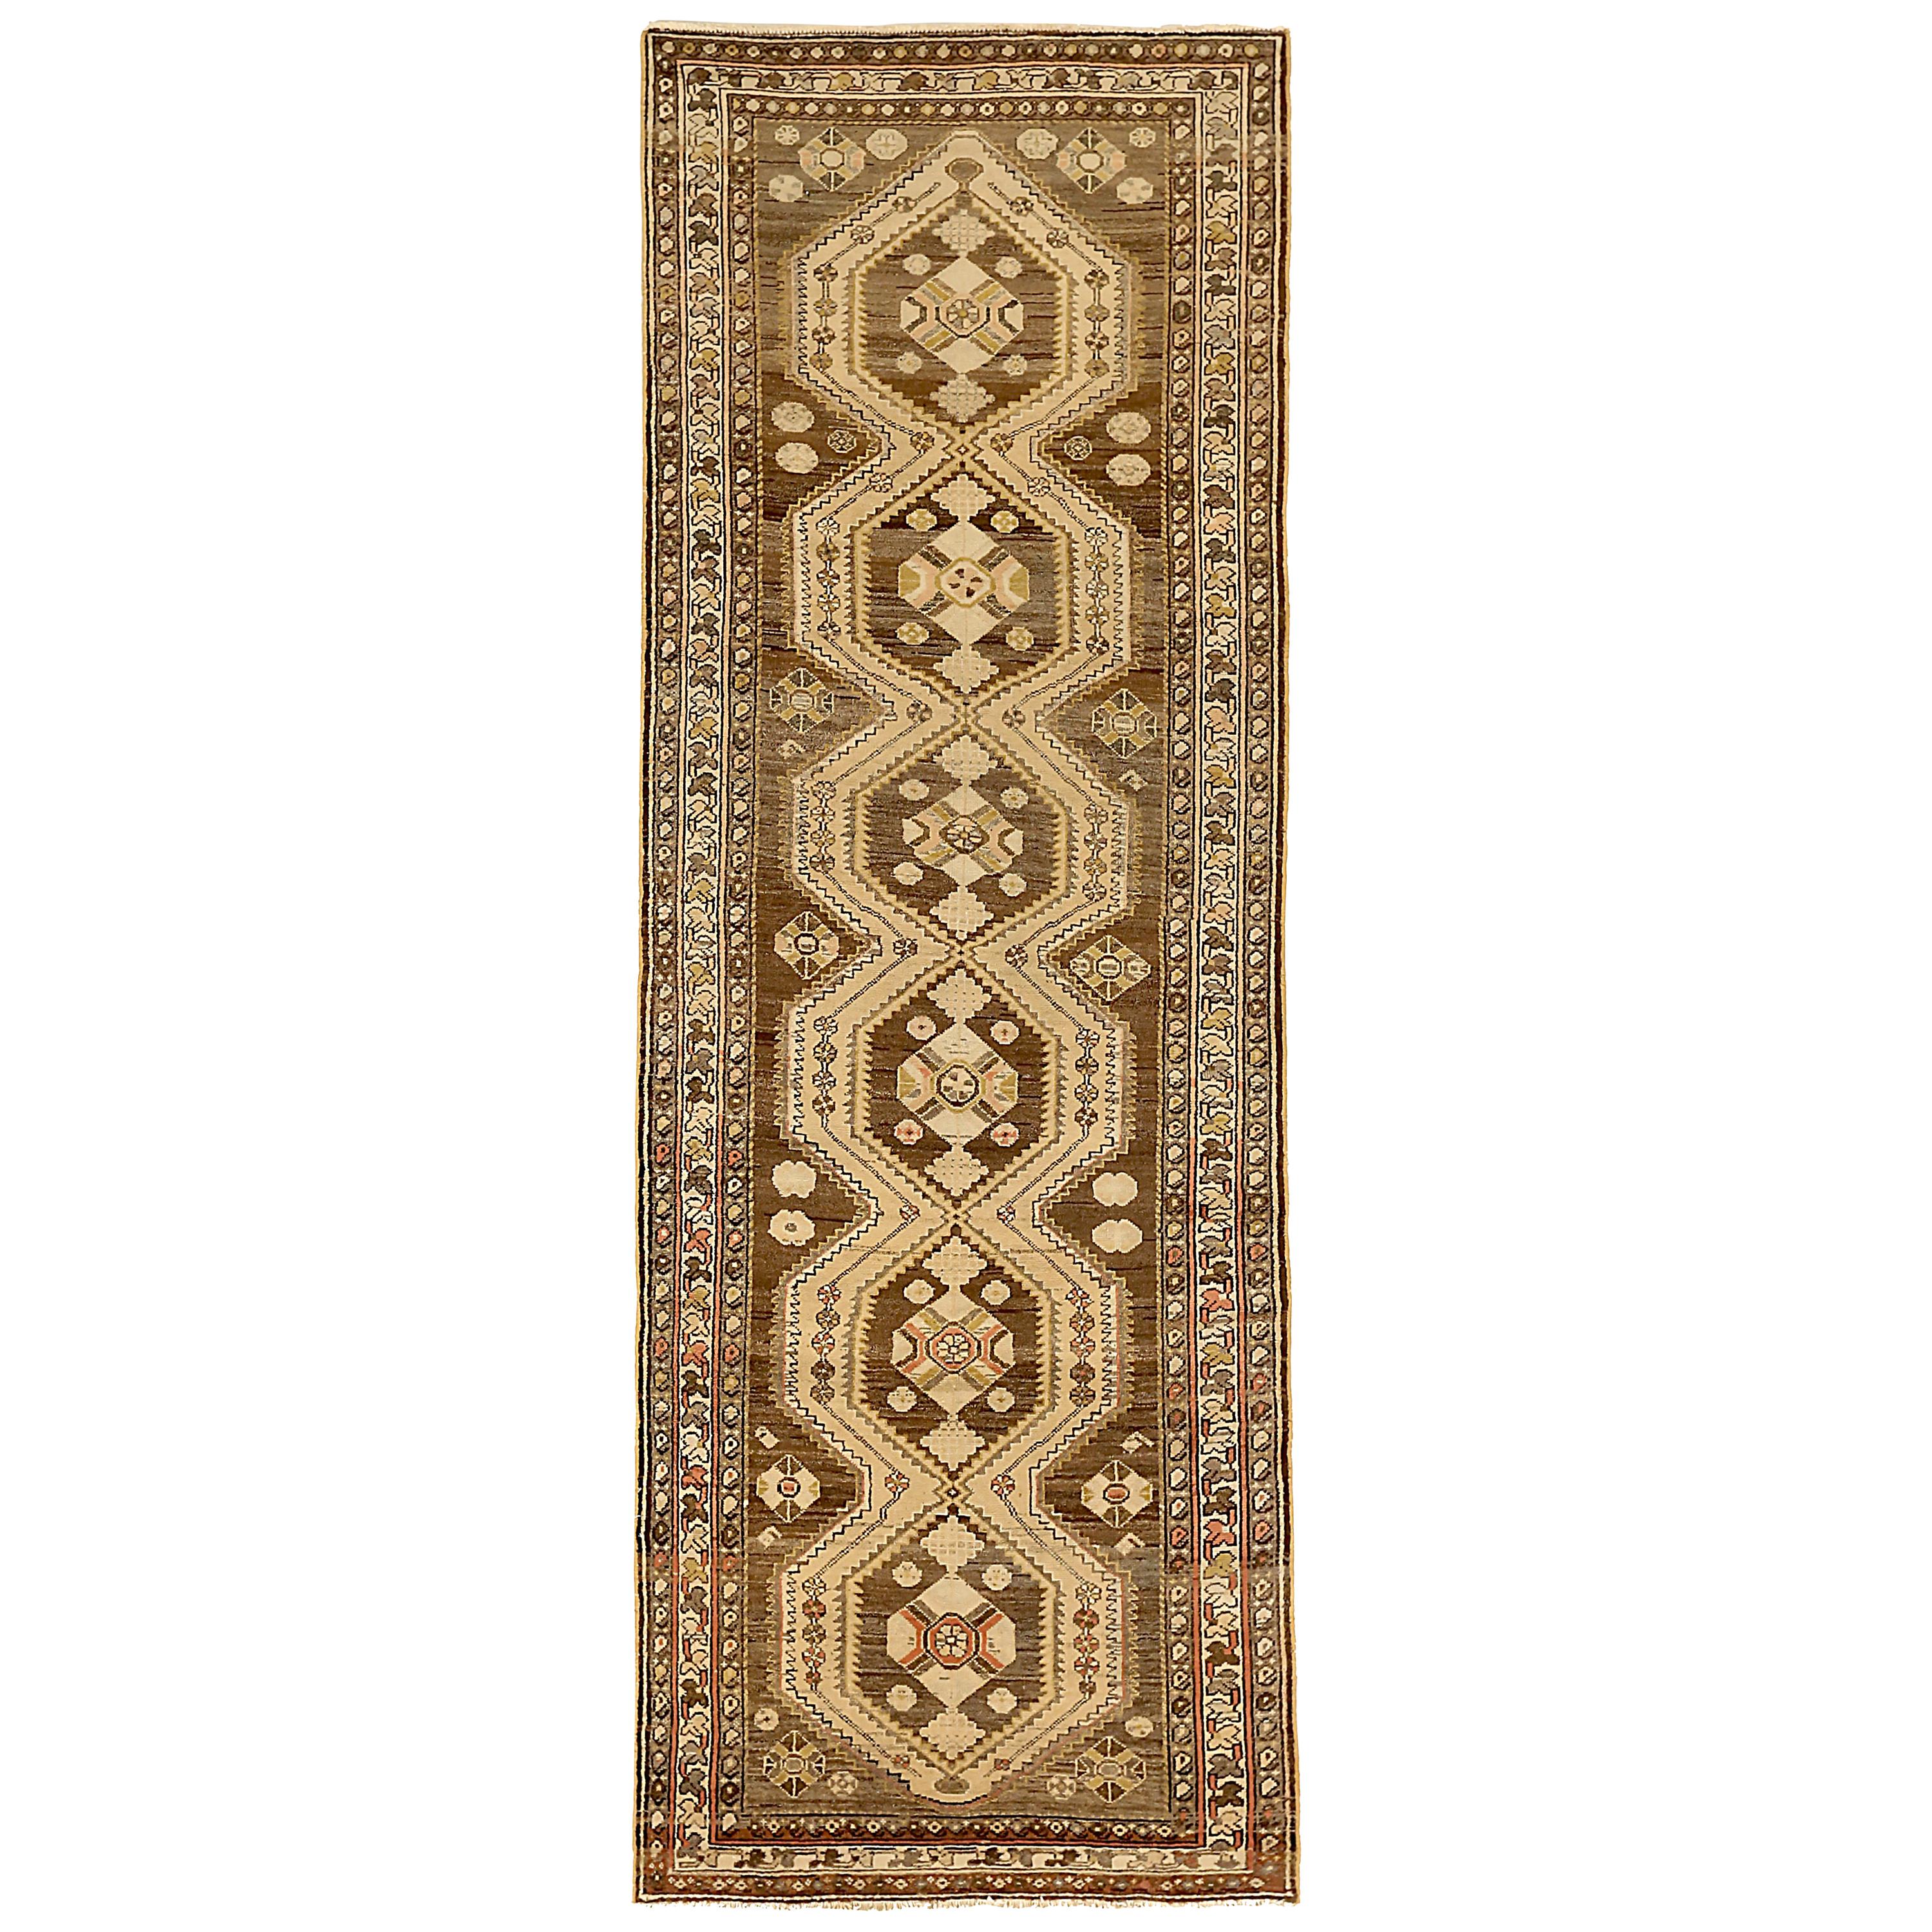 Antique Persian Malayer Area Rug with Geometric Patterns in Brown Field